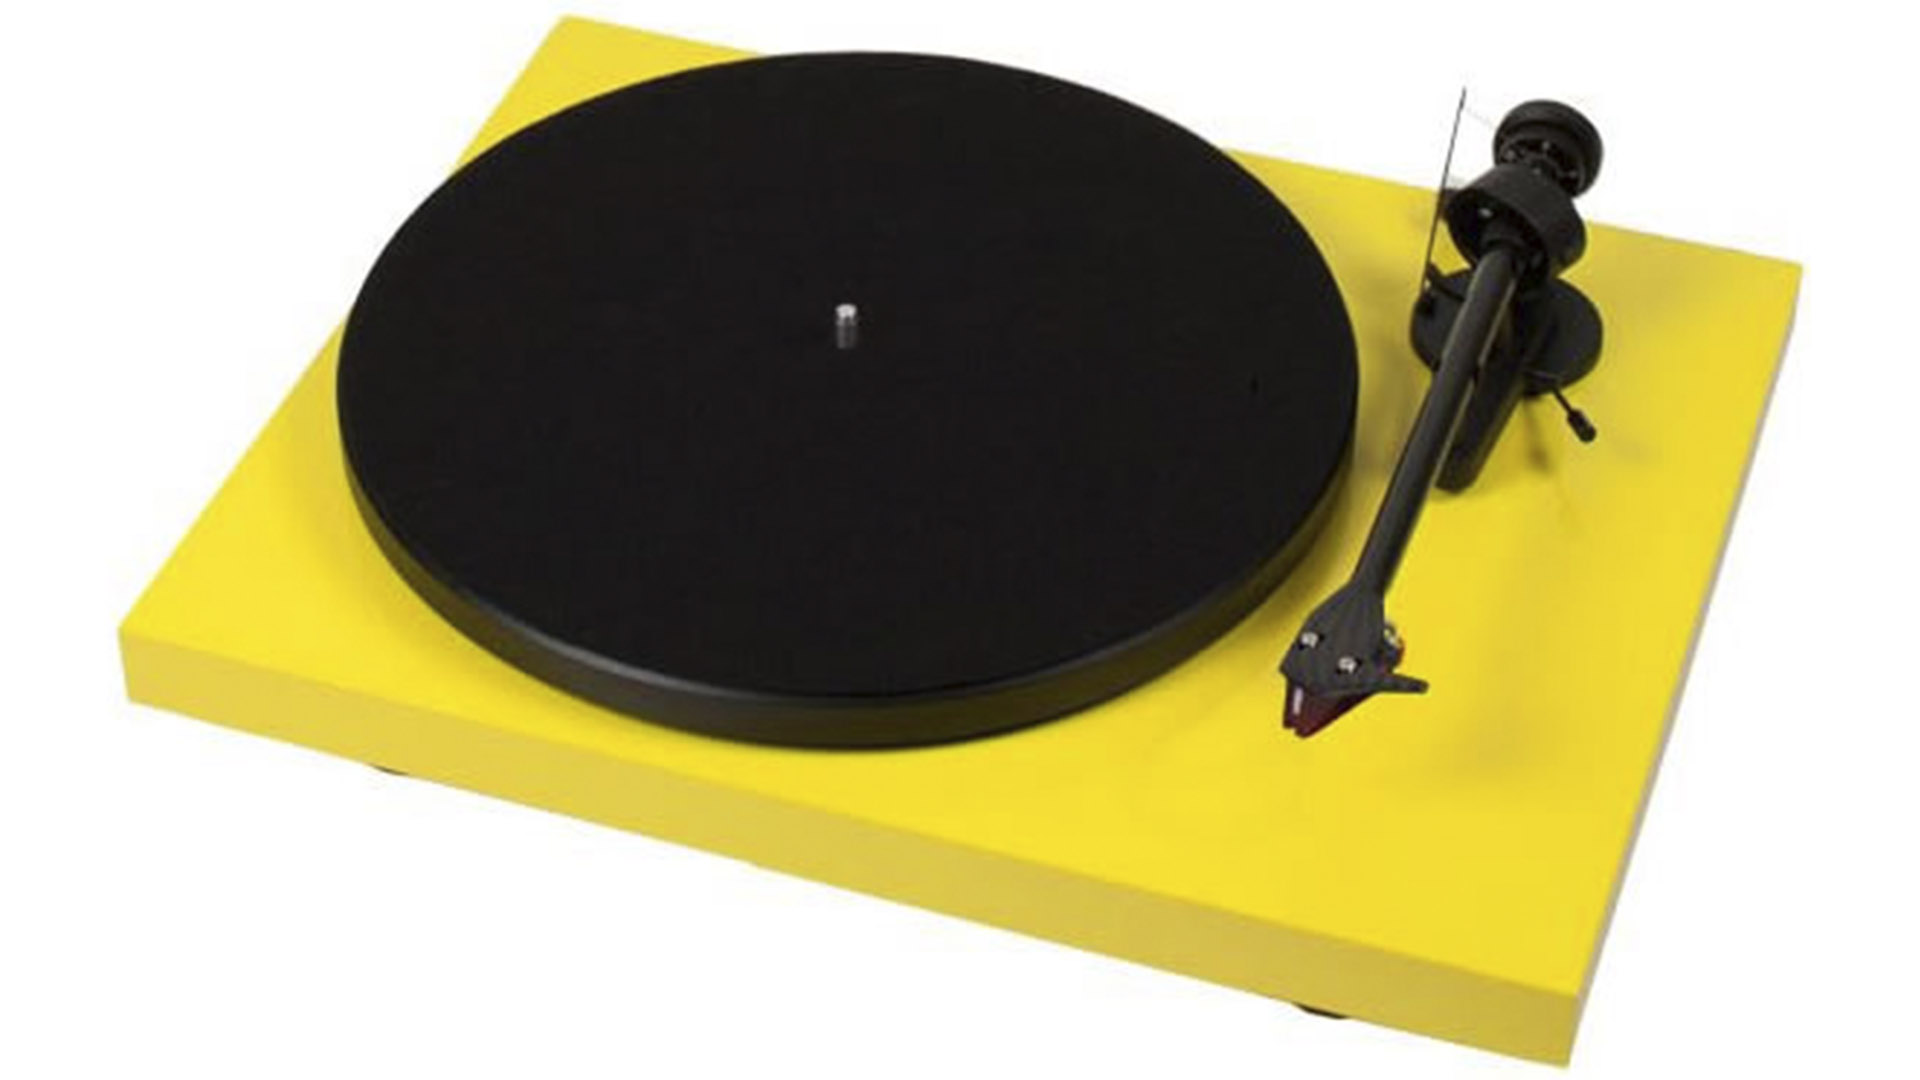 The Pro-Ject Debut Carbon record player in yellow